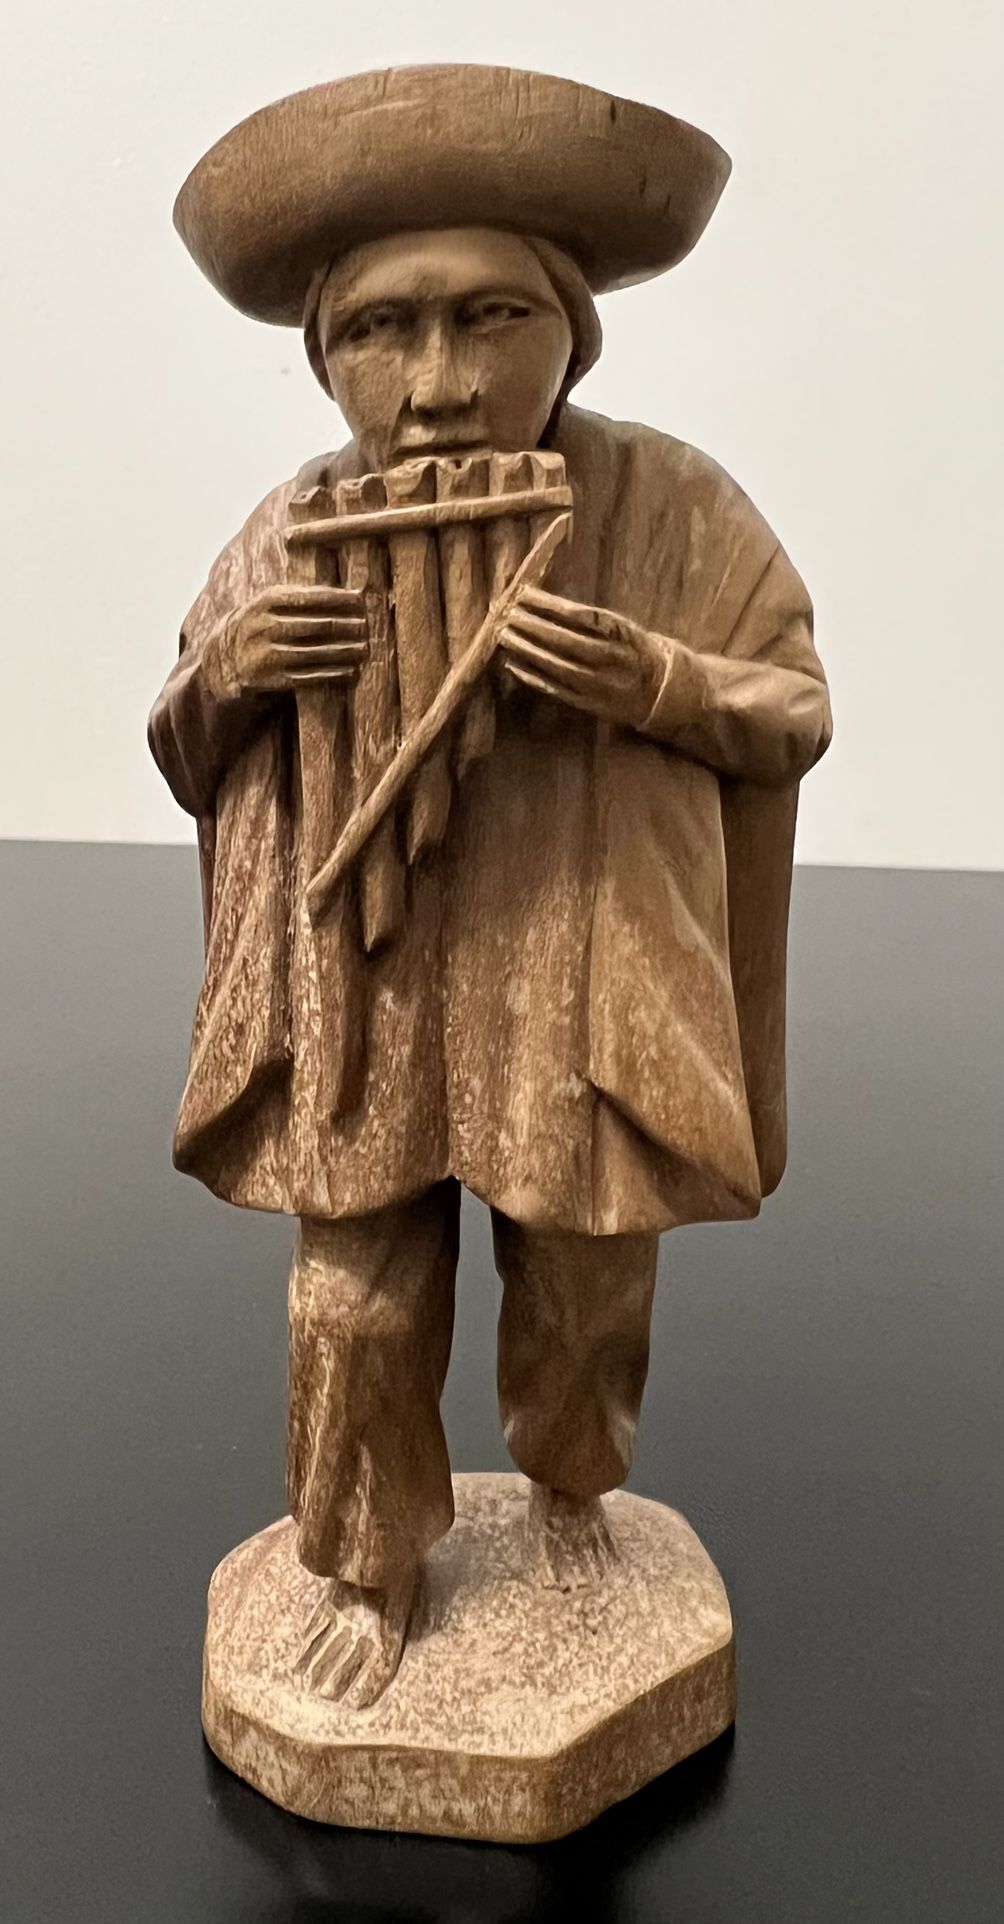 Wooden Hand Carved Barefoot Man With Overcoat Folk Art Sculpture Very Detailed